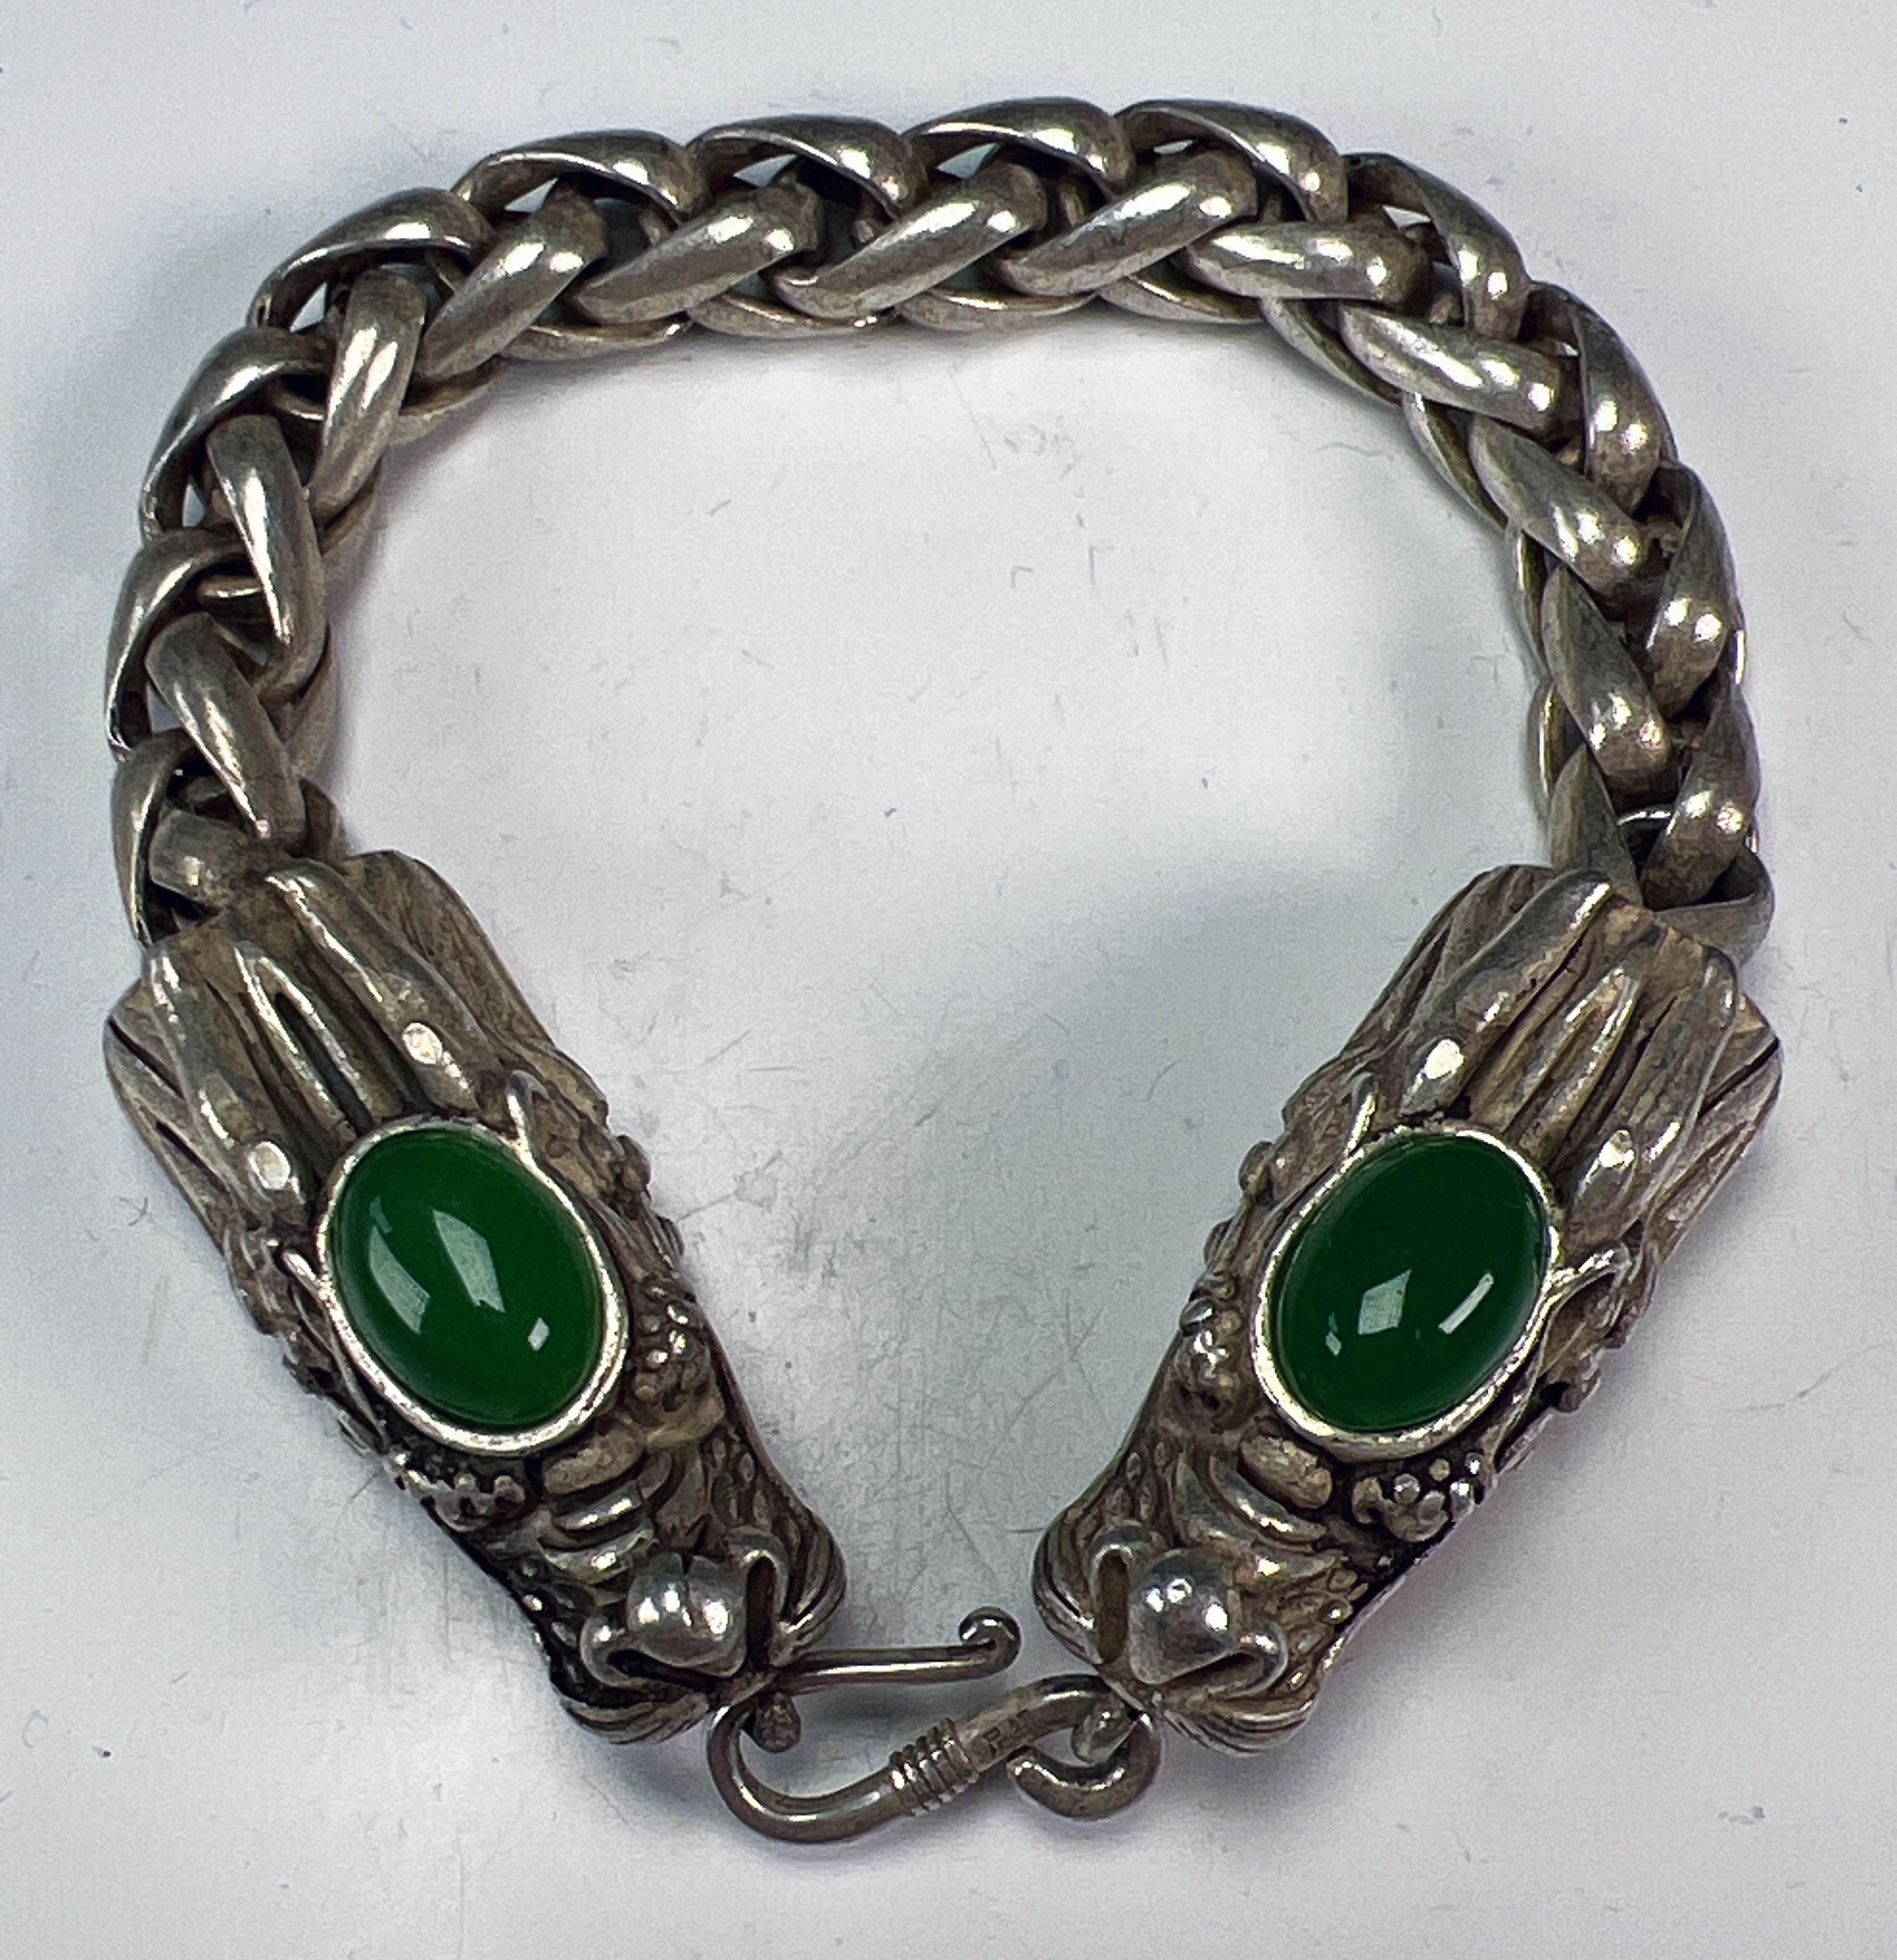 Miao Silver Dragon Bracelet With Jade Accents image 2